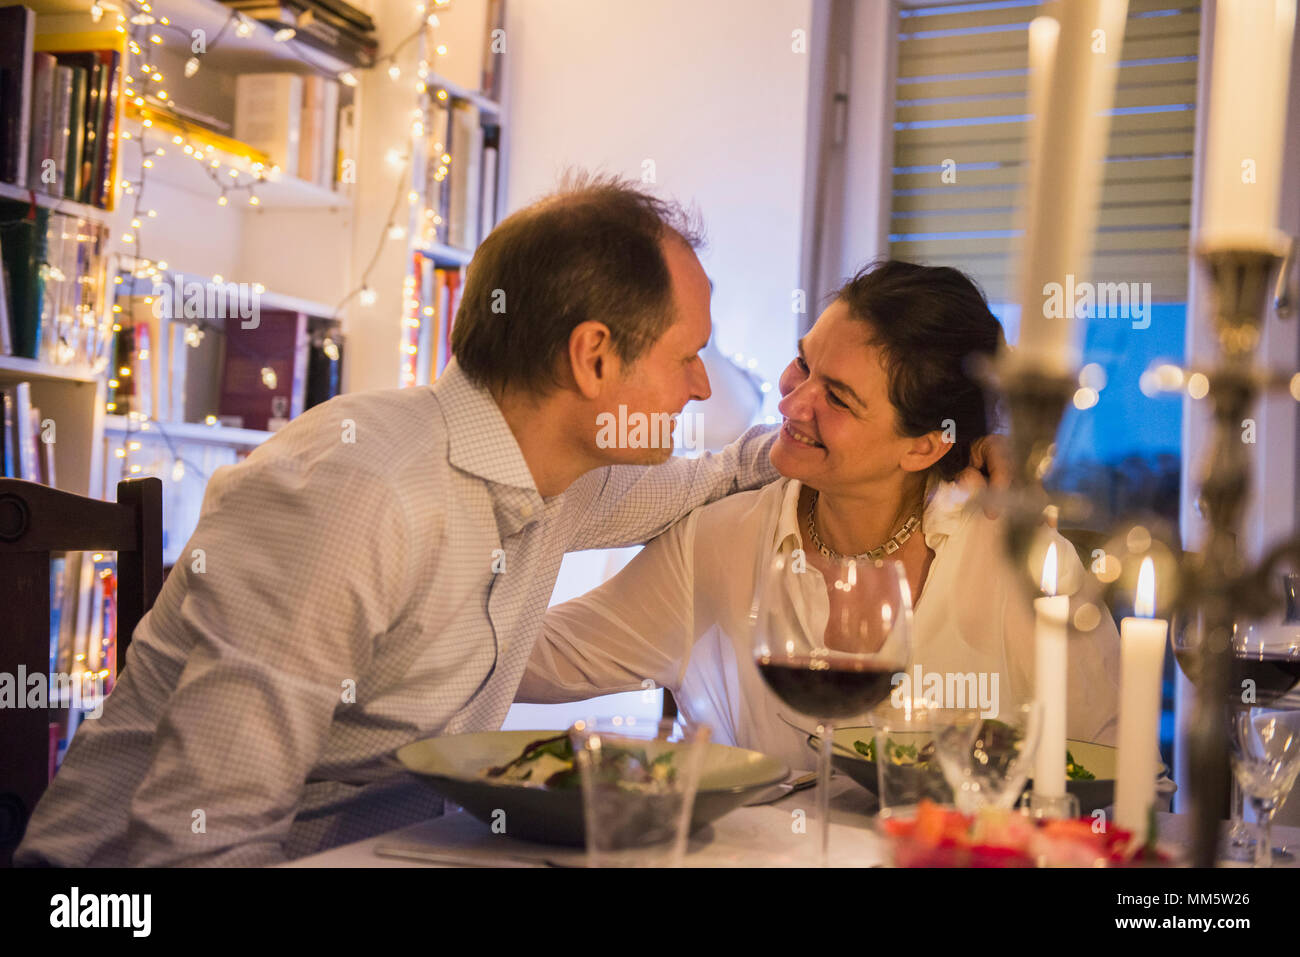 Couple embracing each other at a candlelight dinner Stock Photo